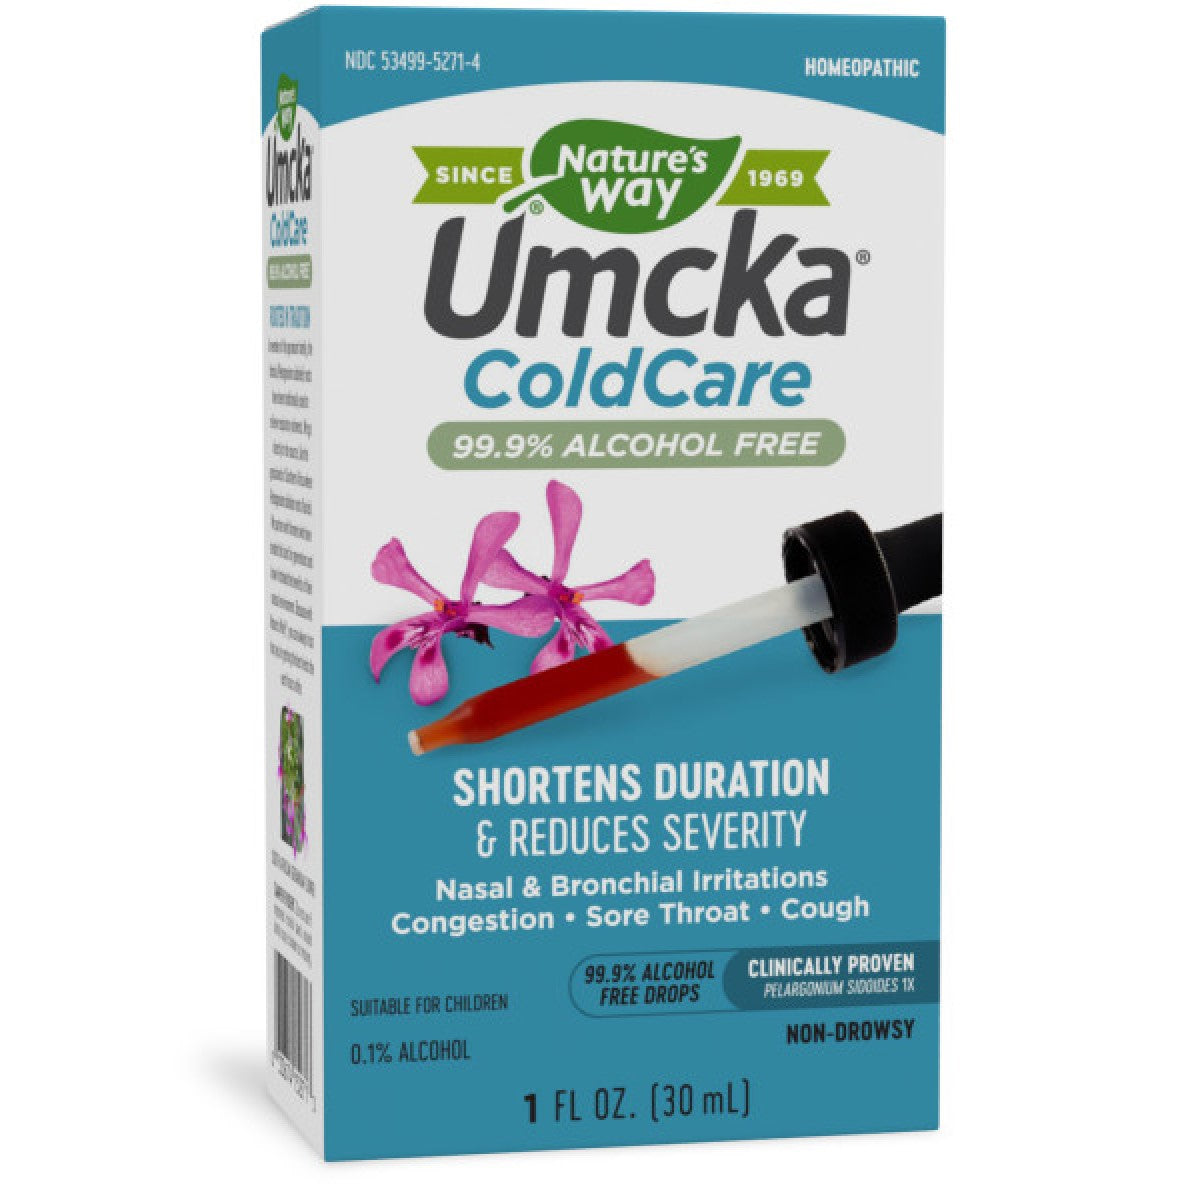 Primary image of Umcka ColdCare 99.9% Alcohol-Free Drops